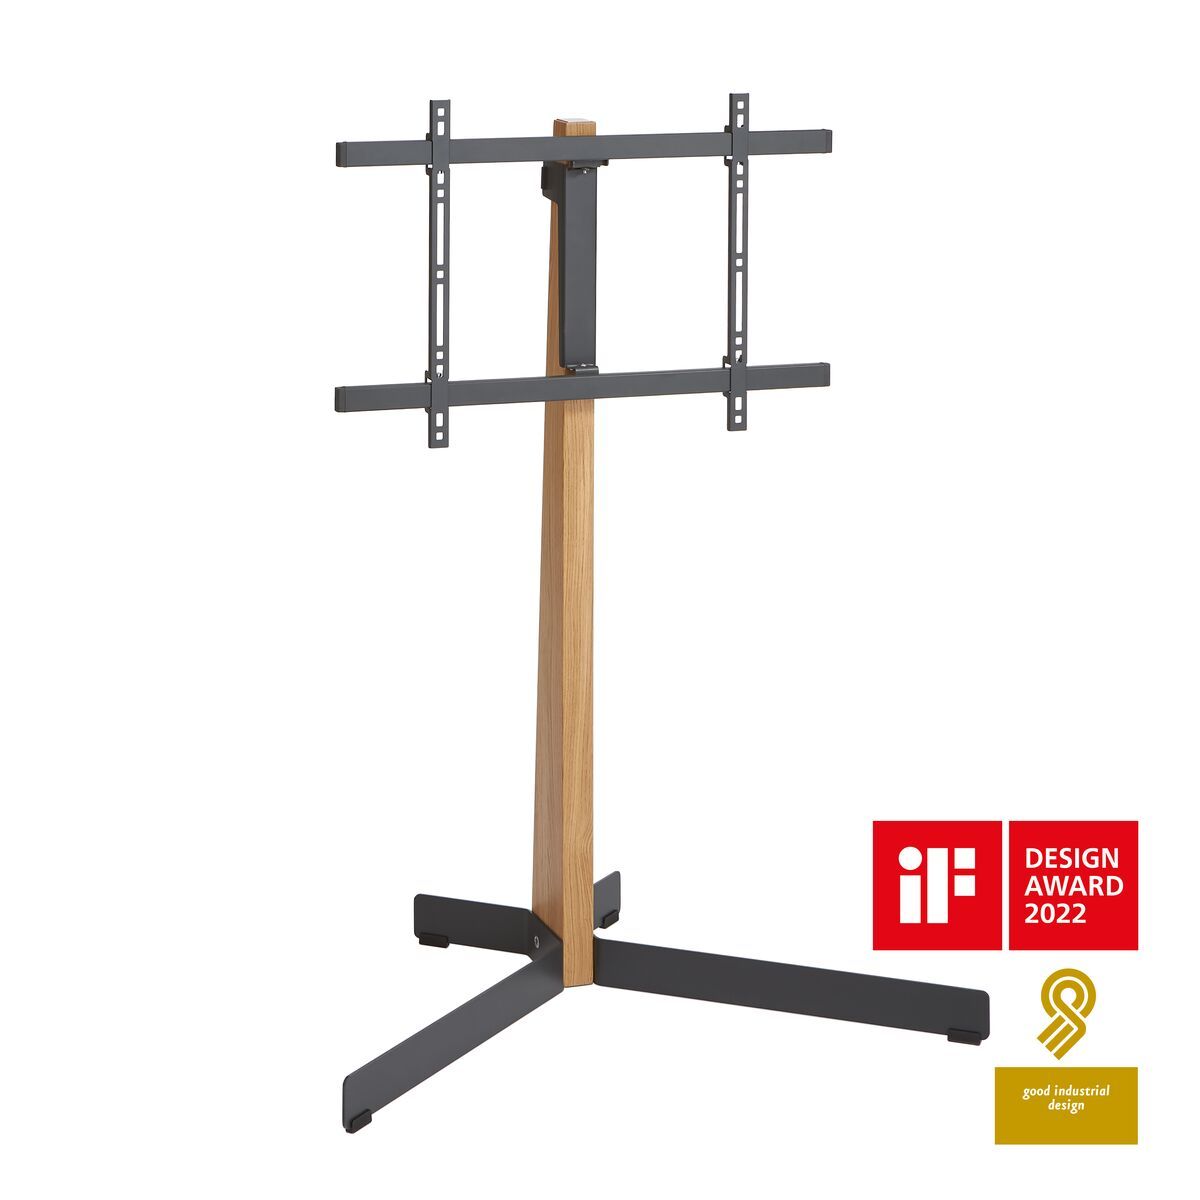 Vogel's TVS 3695 TV Floor Stand (black) - Suitable for 40 up to 77 inch TVs up to Promo